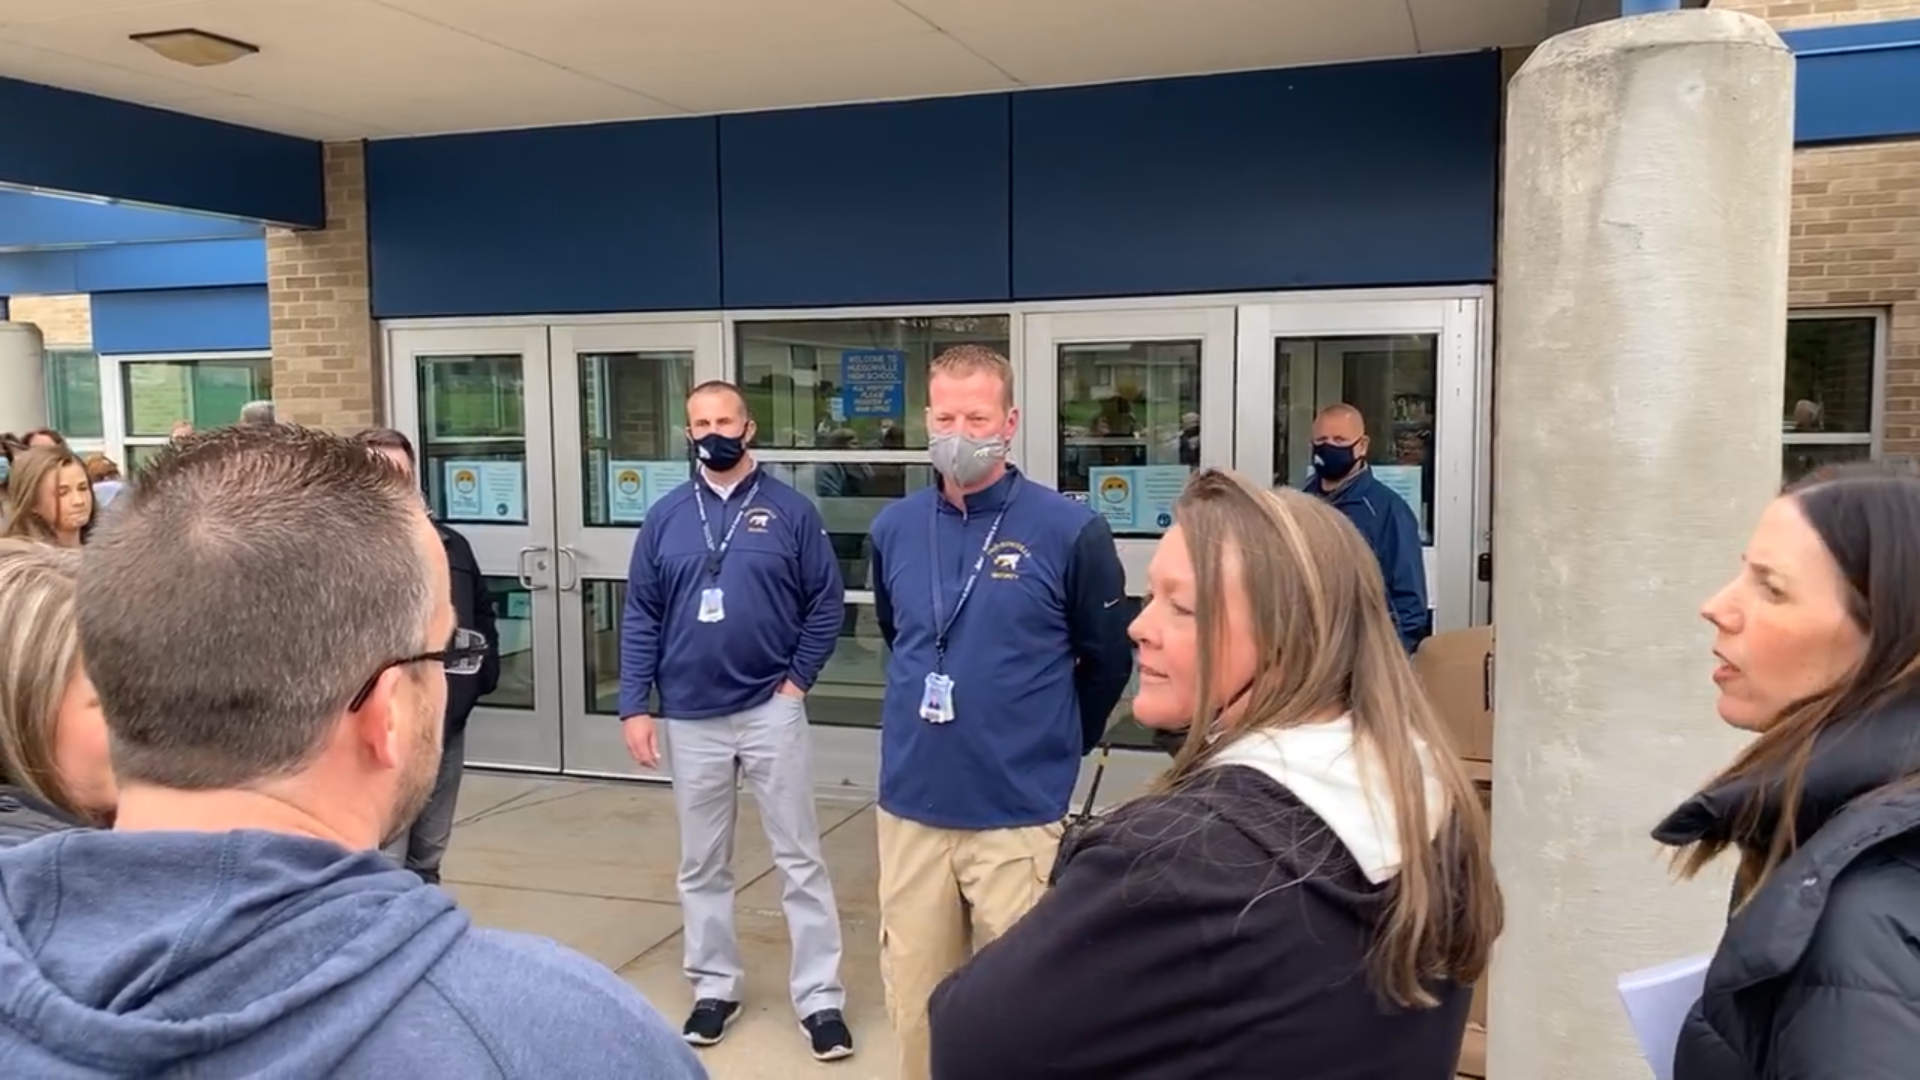 VIDEO: Hudsonville Parents Denied Entry to School Board Meeting - Us Against Media